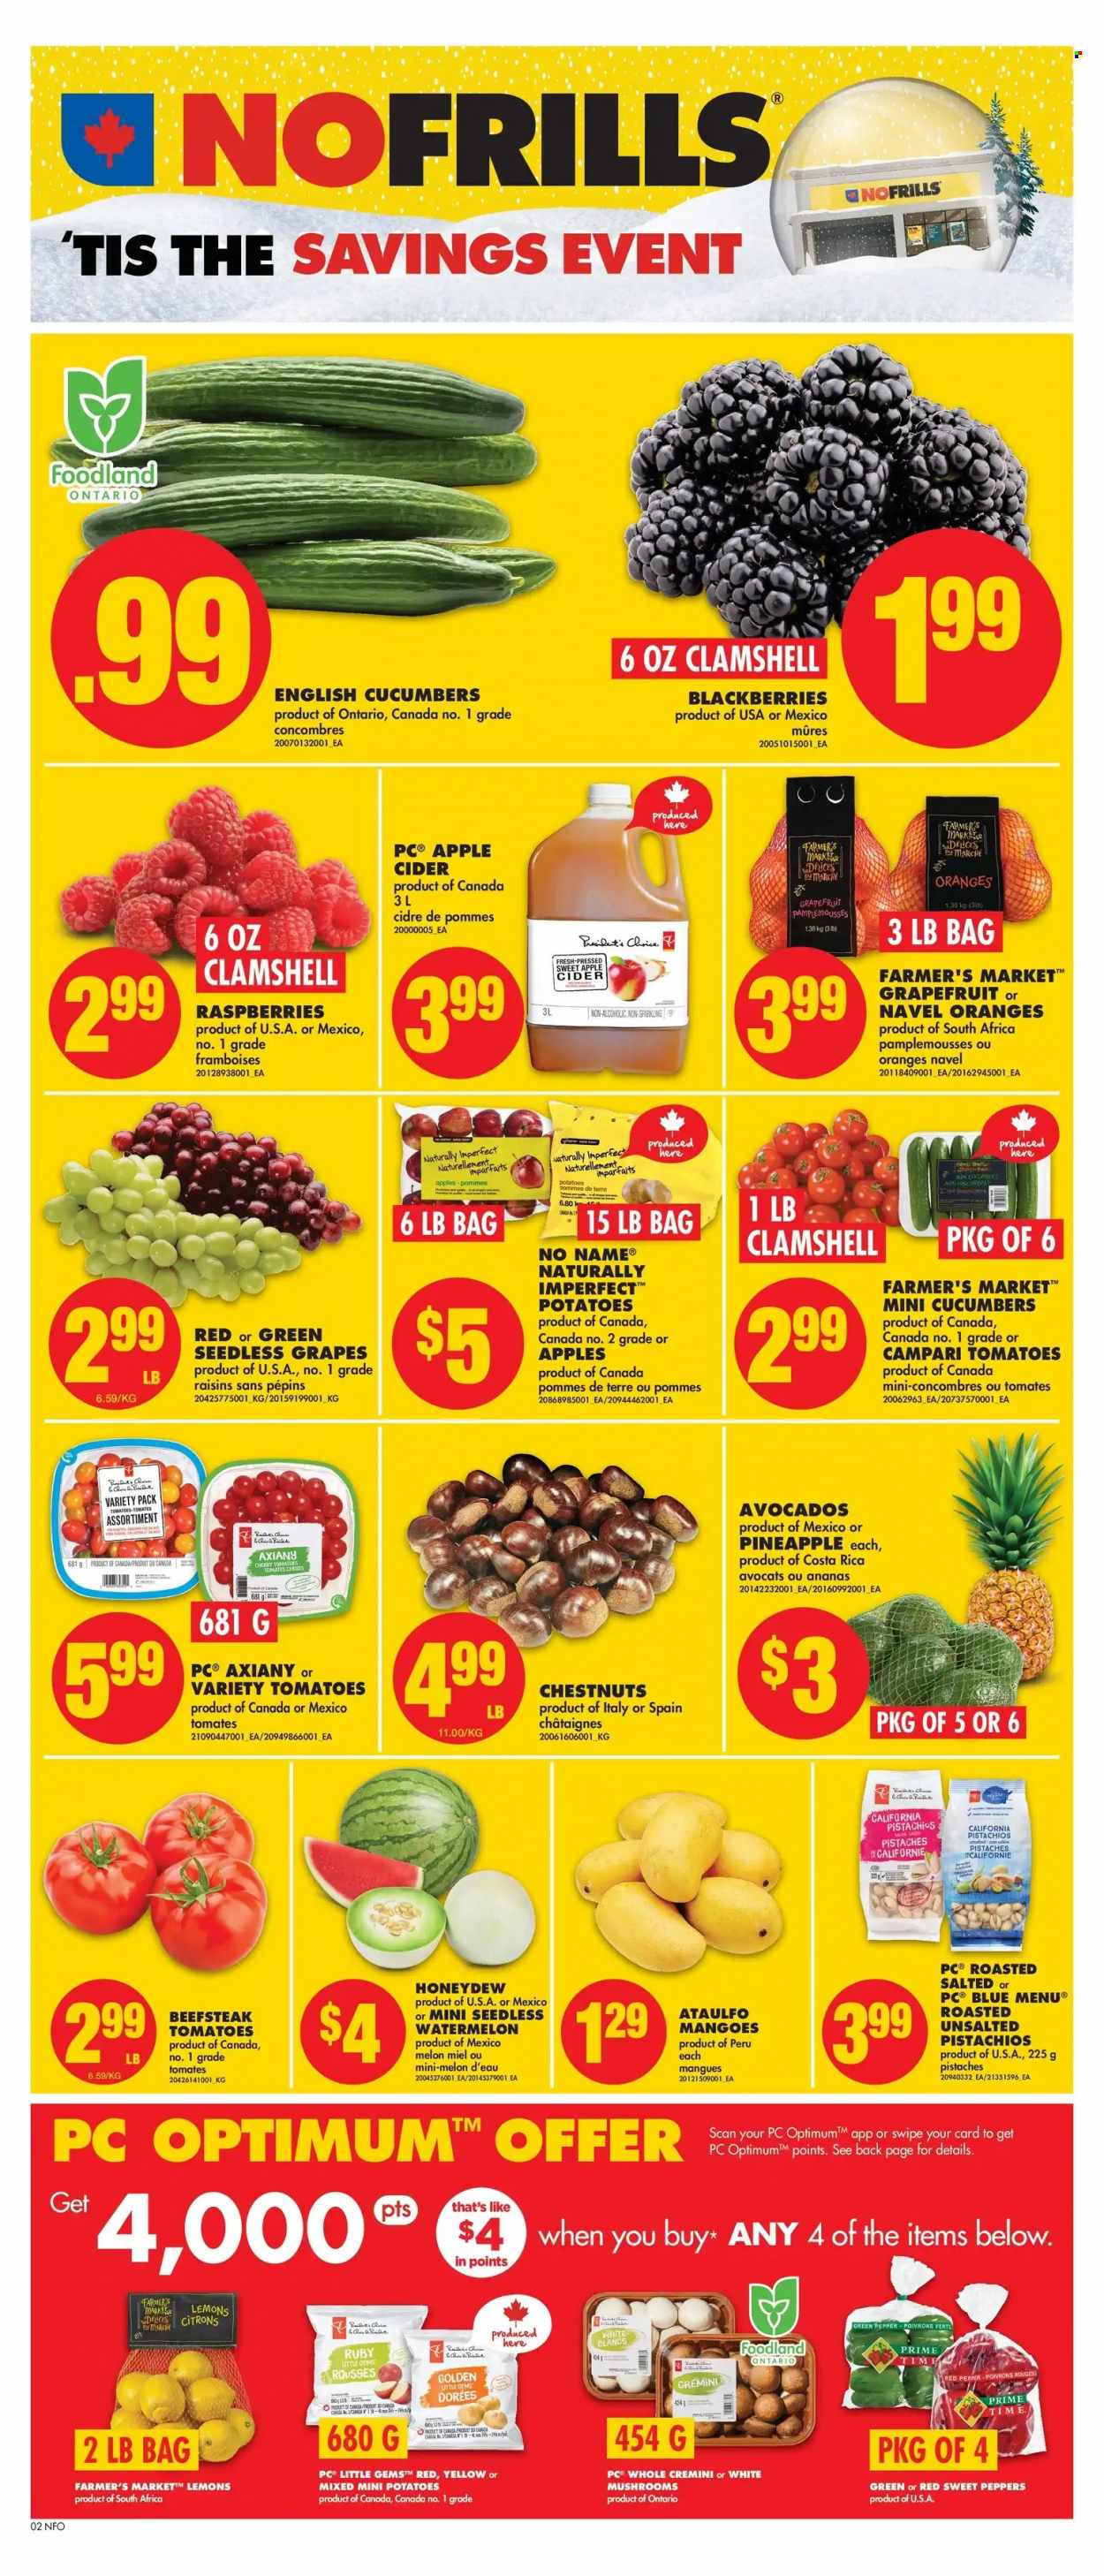 thumbnail - No Frills Flyer - November 24, 2022 - November 30, 2022 - Sales products - mushrooms, chair, cucumber, sweet peppers, tomatoes, potatoes, peppers, green pepper, avocado, blackberries, grapefruits, grapes, mango, seedless grapes, watermelon, honeydew, oranges, melons, lemons, navel oranges, No Name, Président, chestnuts, dried fruit, pistachios, apple cider, cider, Optimum, raisins. Page 2.